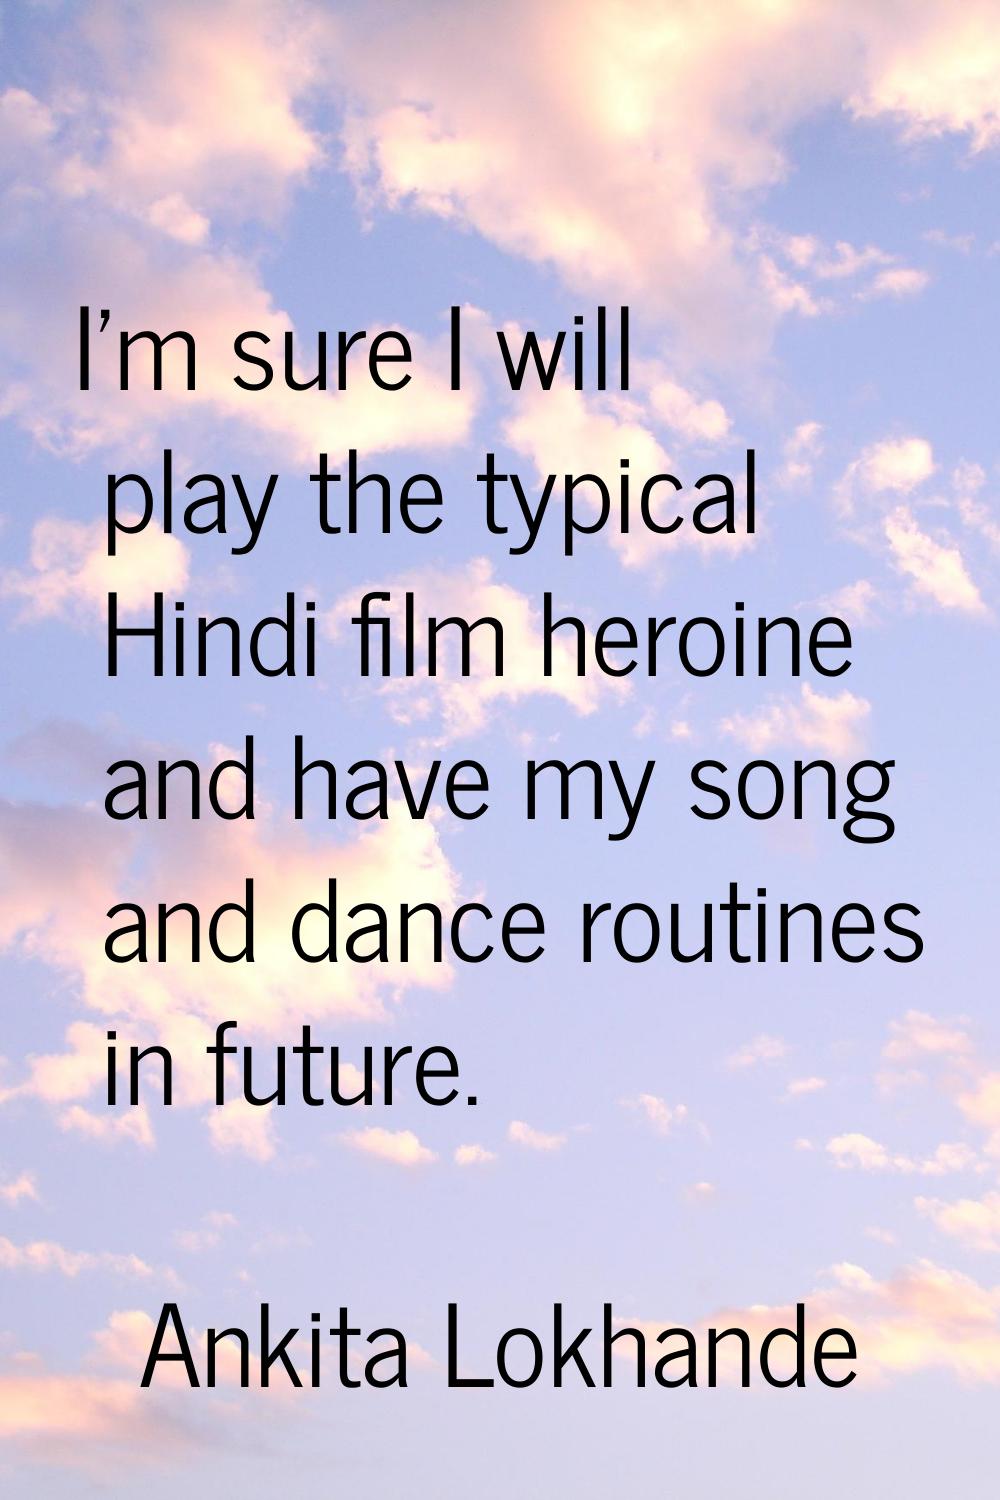 I'm sure I will play the typical Hindi film heroine and have my song and dance routines in future.